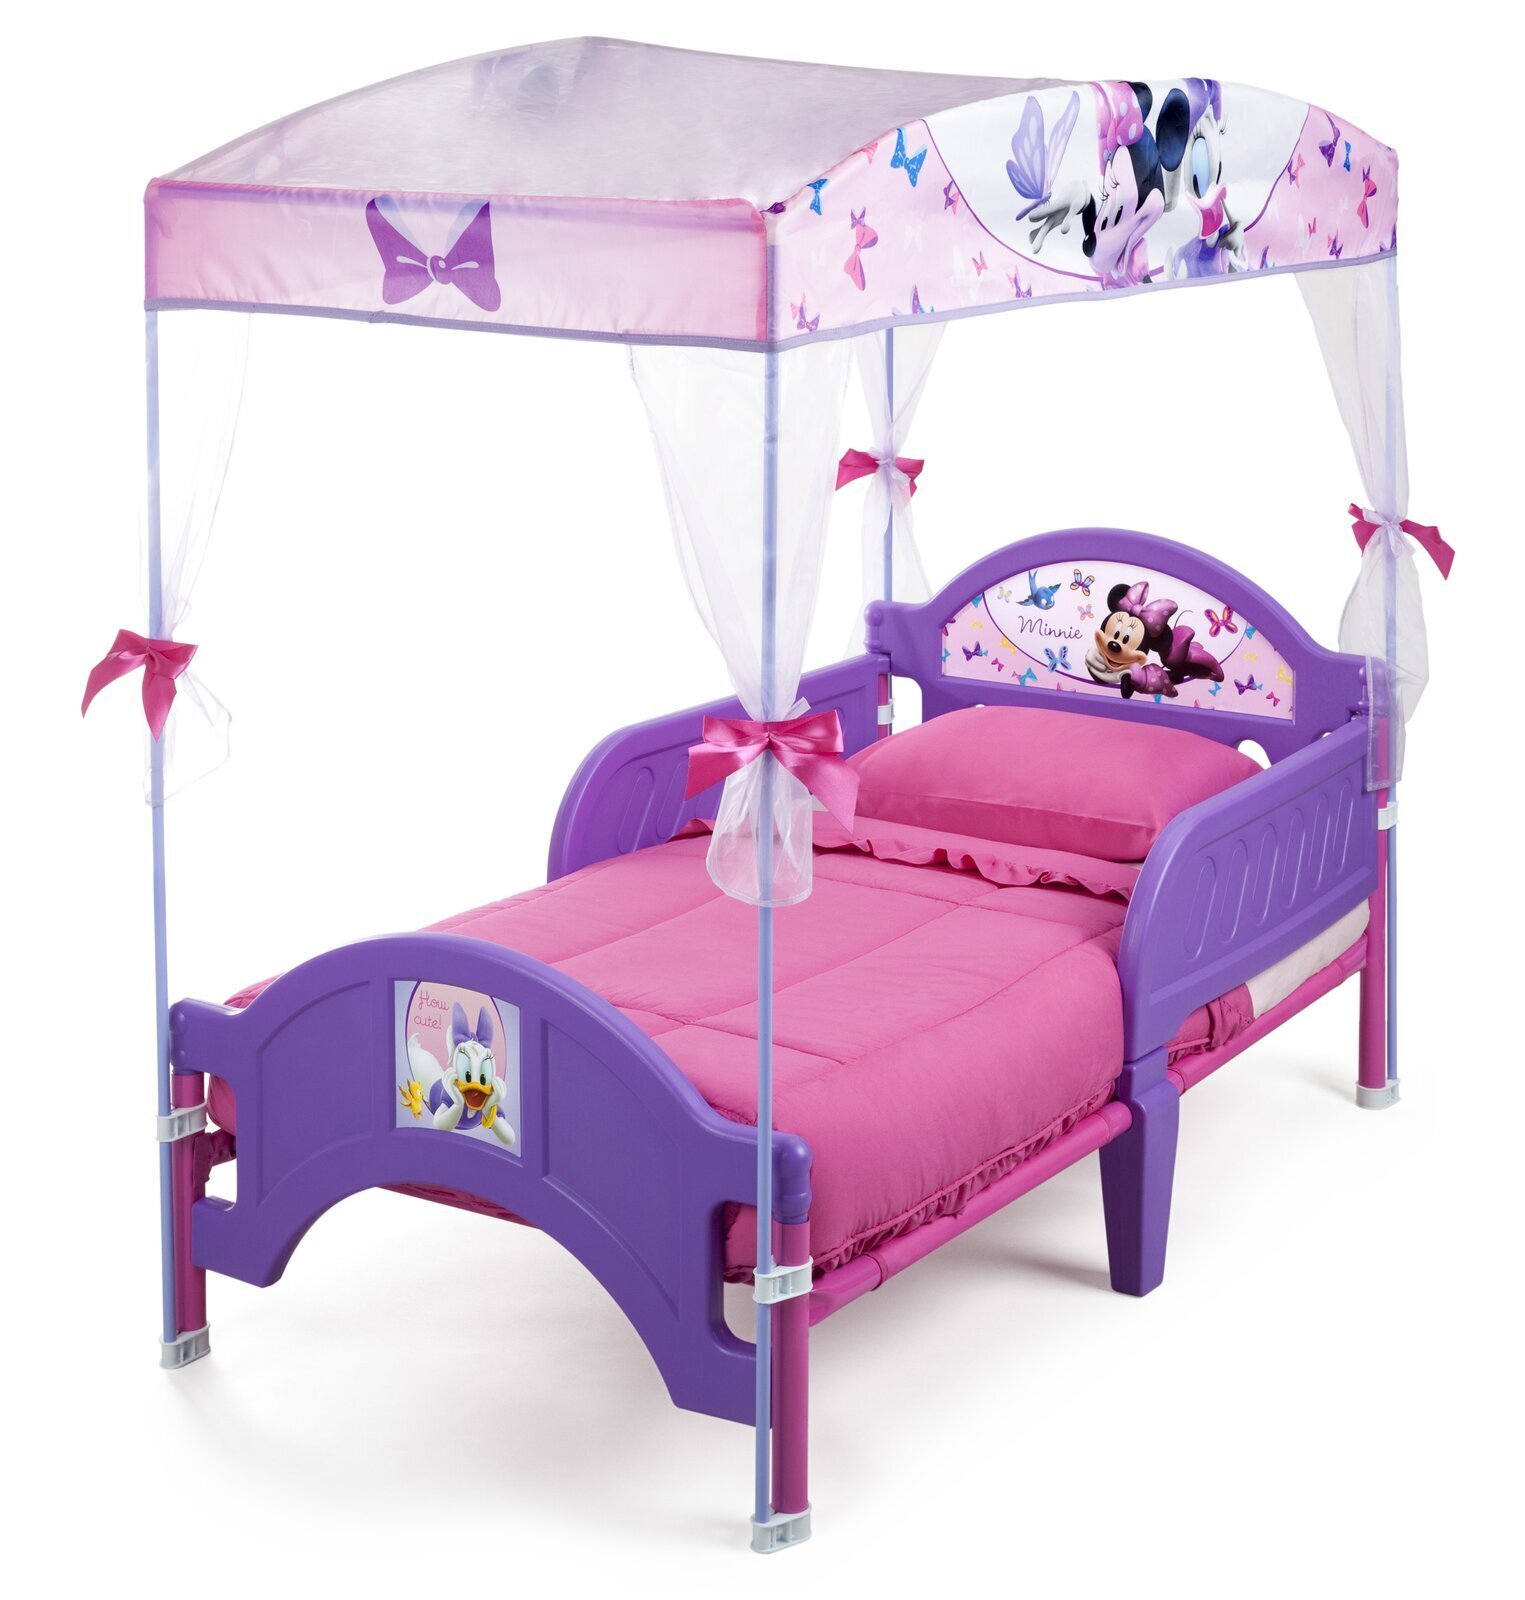 Purple and Pink Toddler Tent Bed 